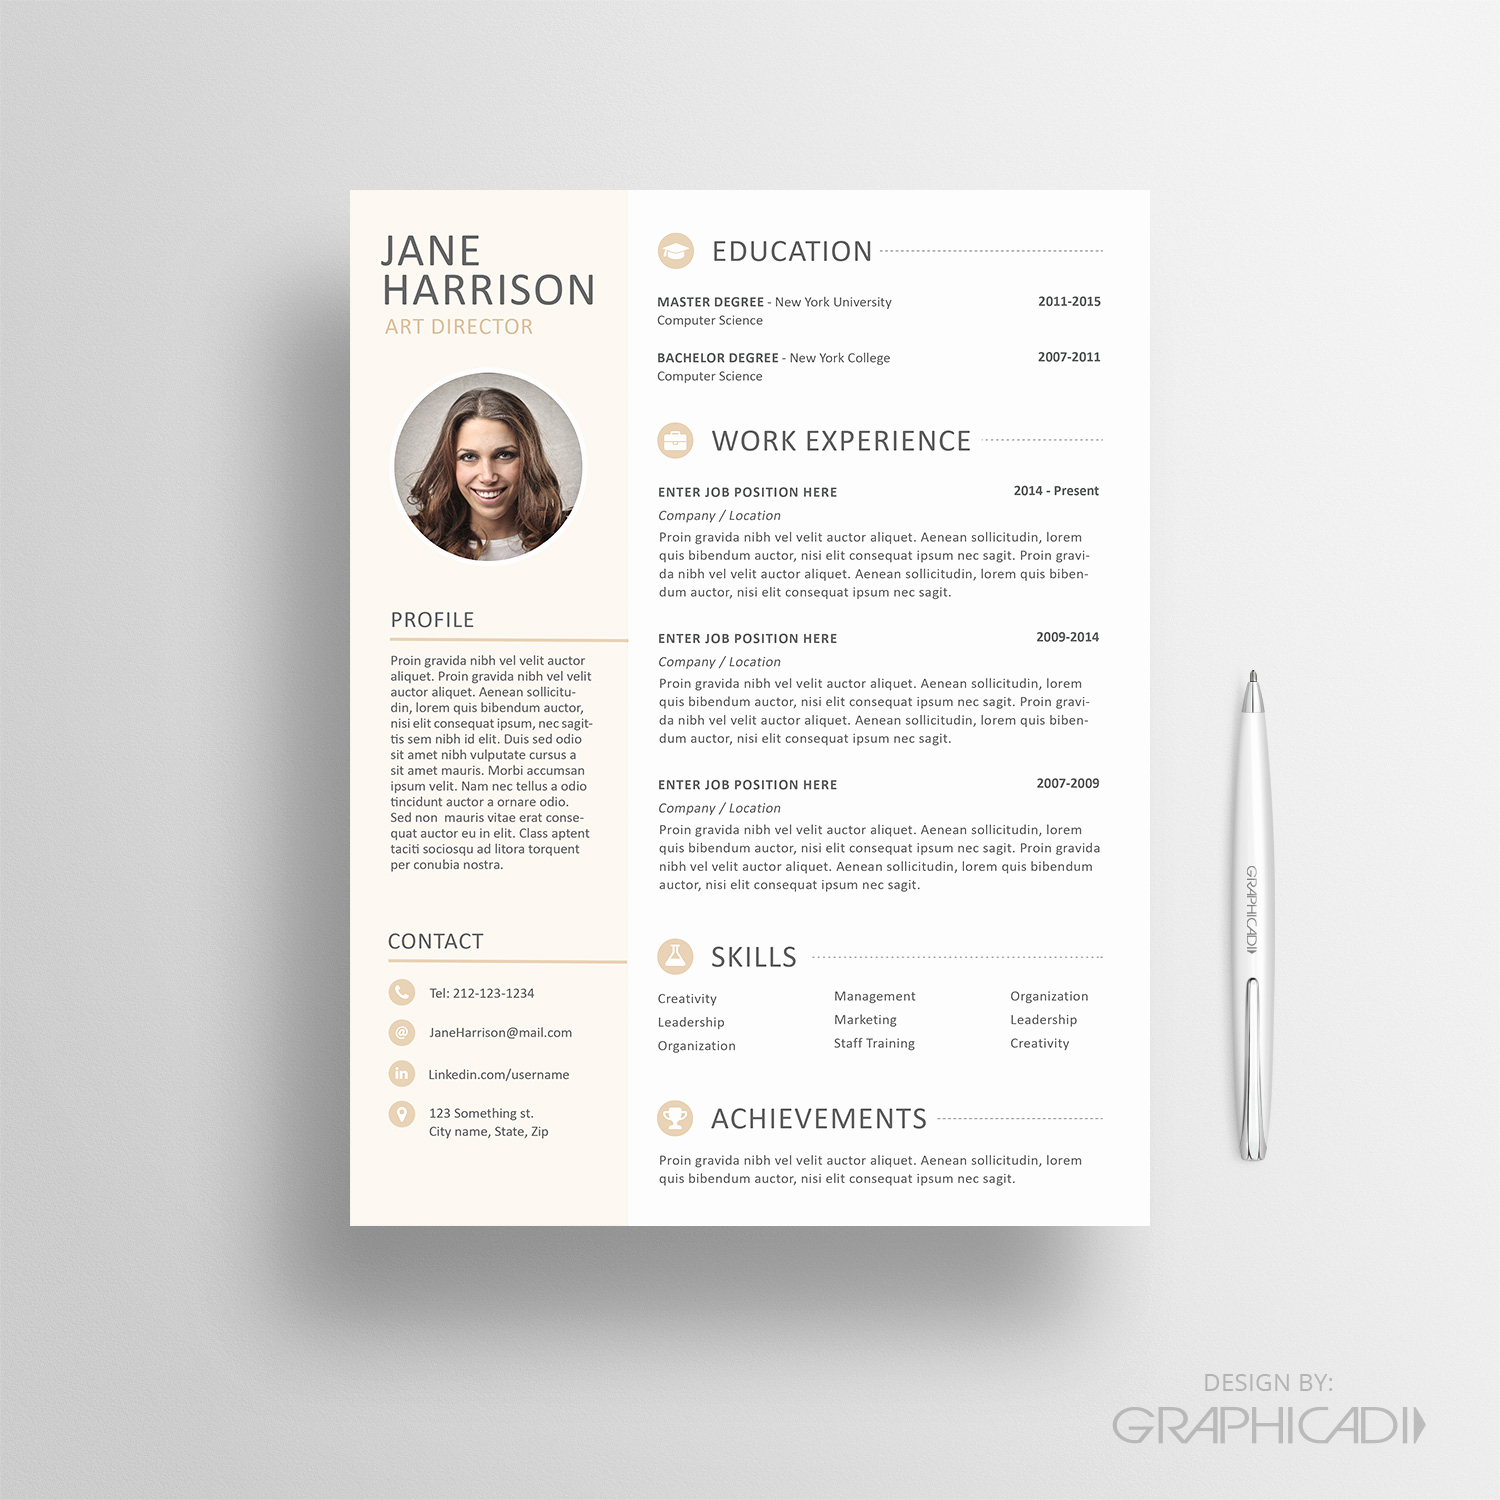 Resume with Picture Template Best Of How to Design An Eye Catching Resume Graphicadi